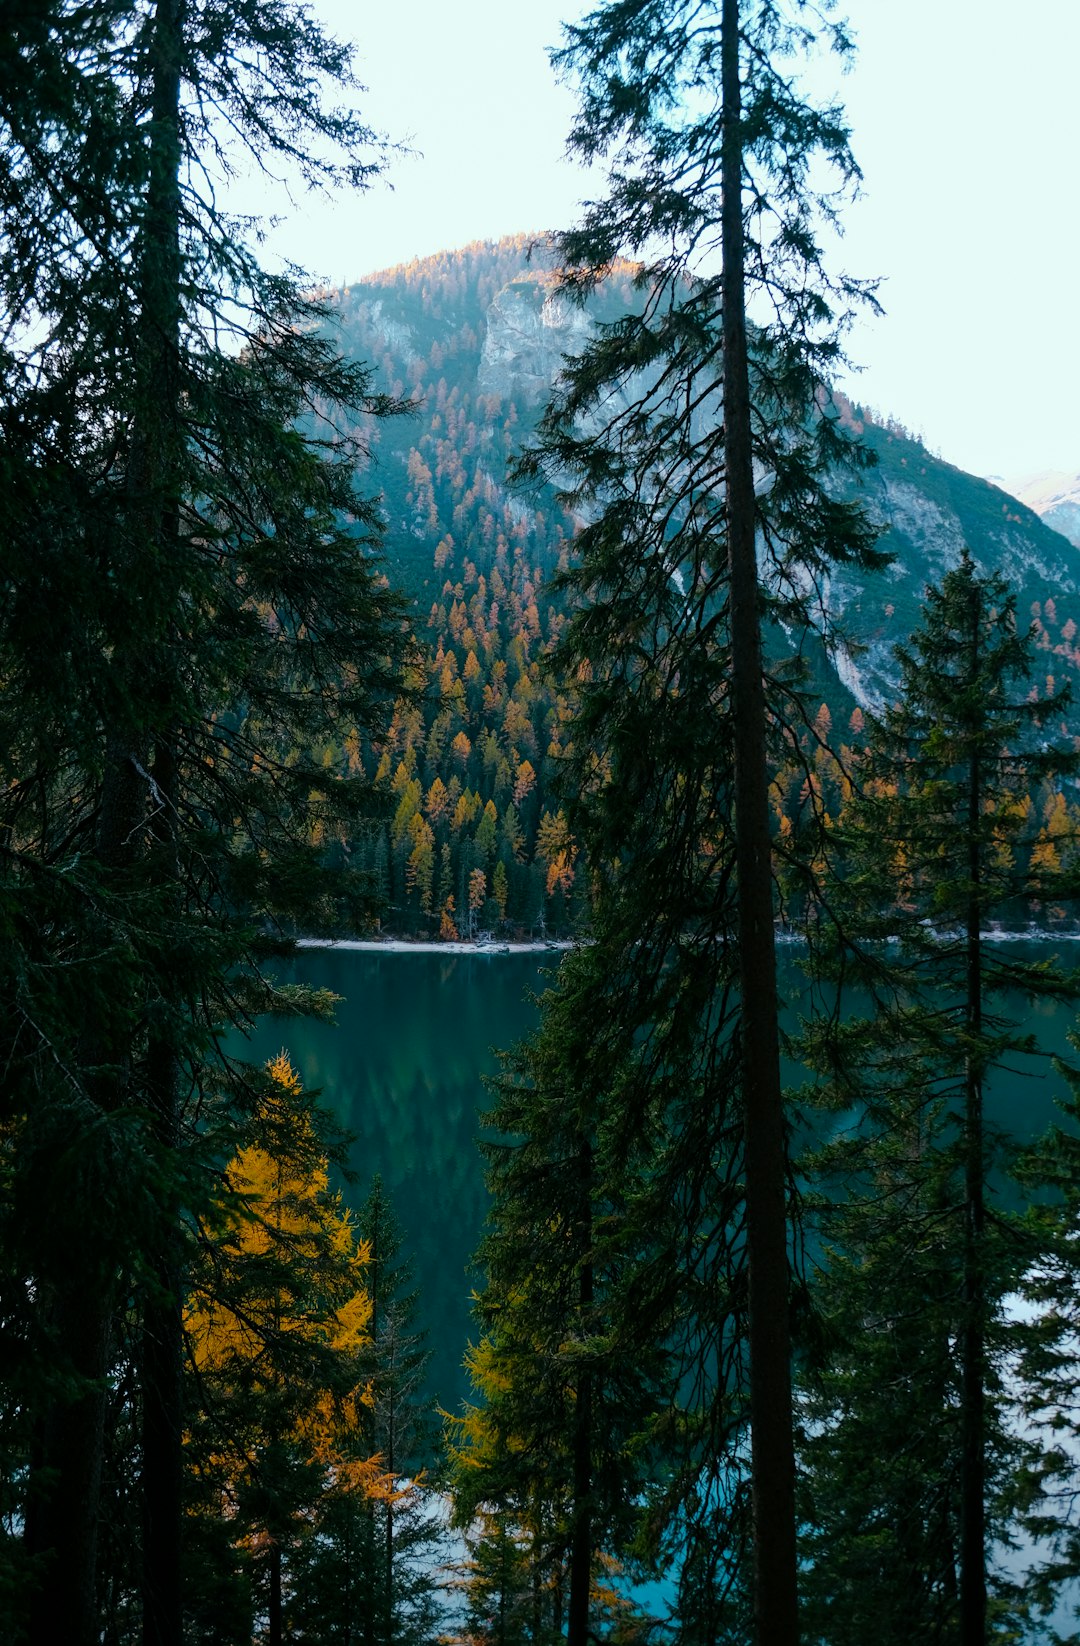 Tropical and subtropical coniferous forests photo spot Lago di Braies Latemar